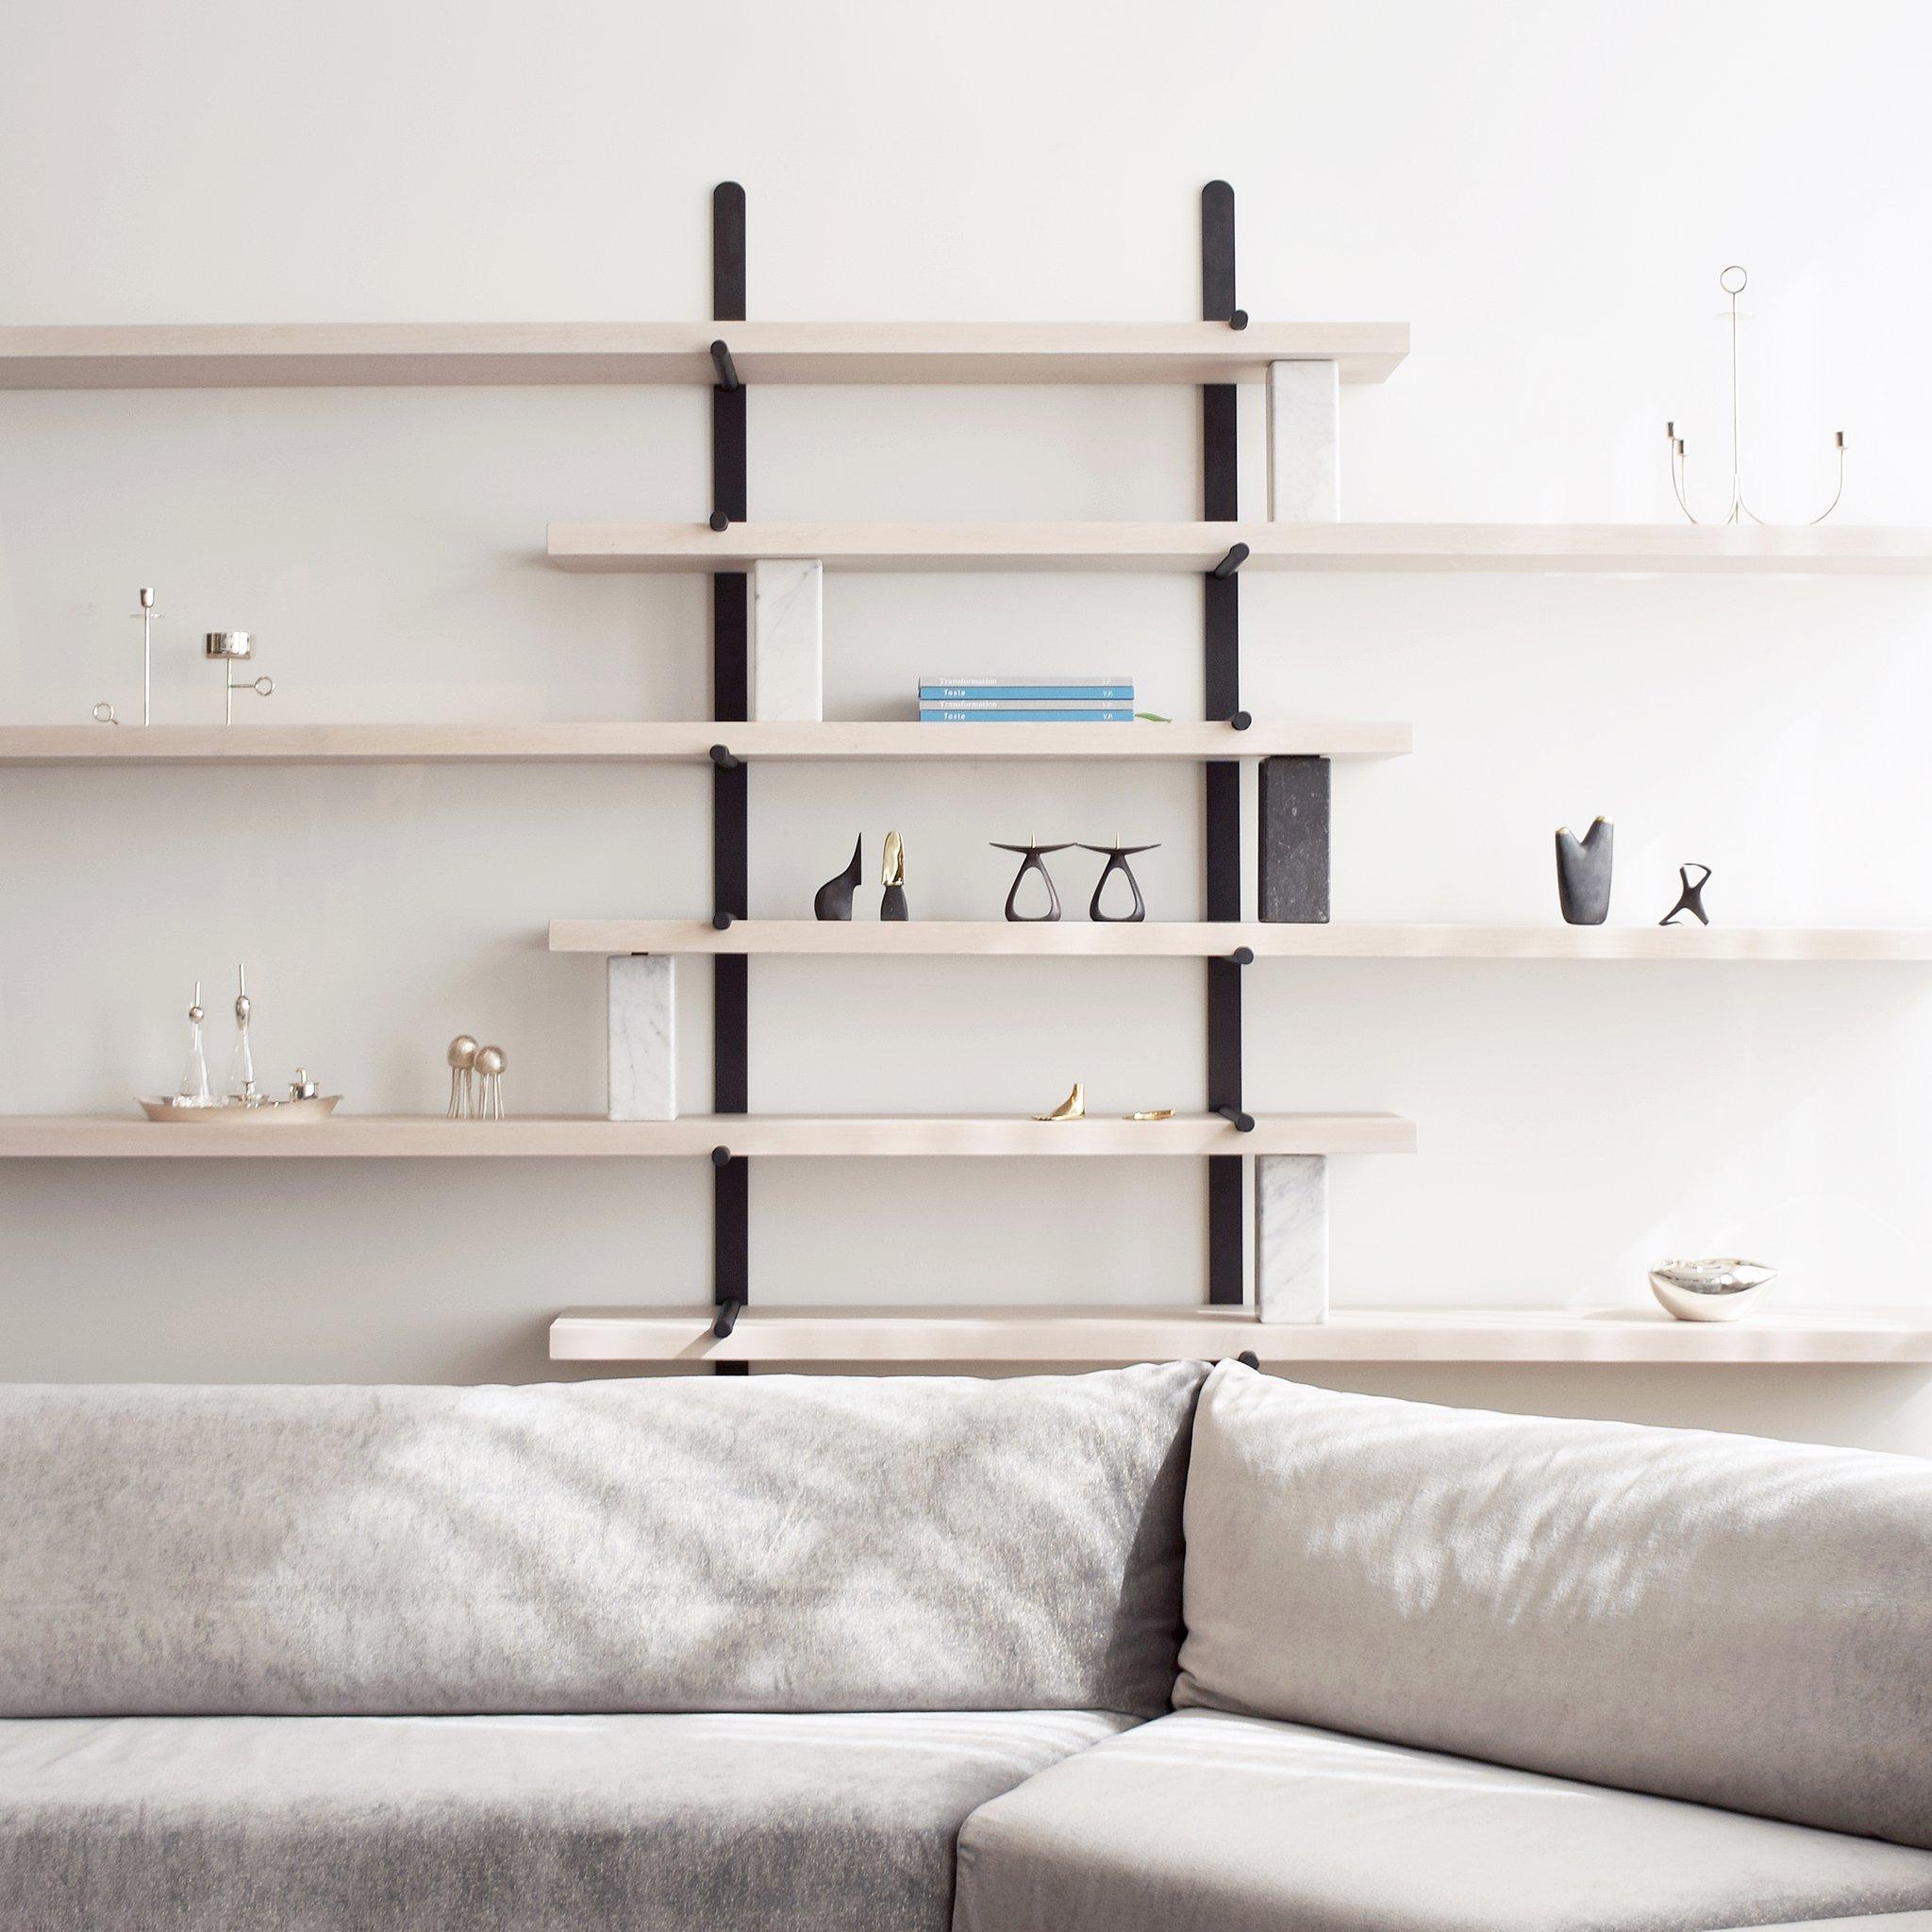 Ladder Street Shelving Unit by Yabu Pushelberg in Ivory Oak and Carrara Marble In New Condition For Sale In Toronto, ON